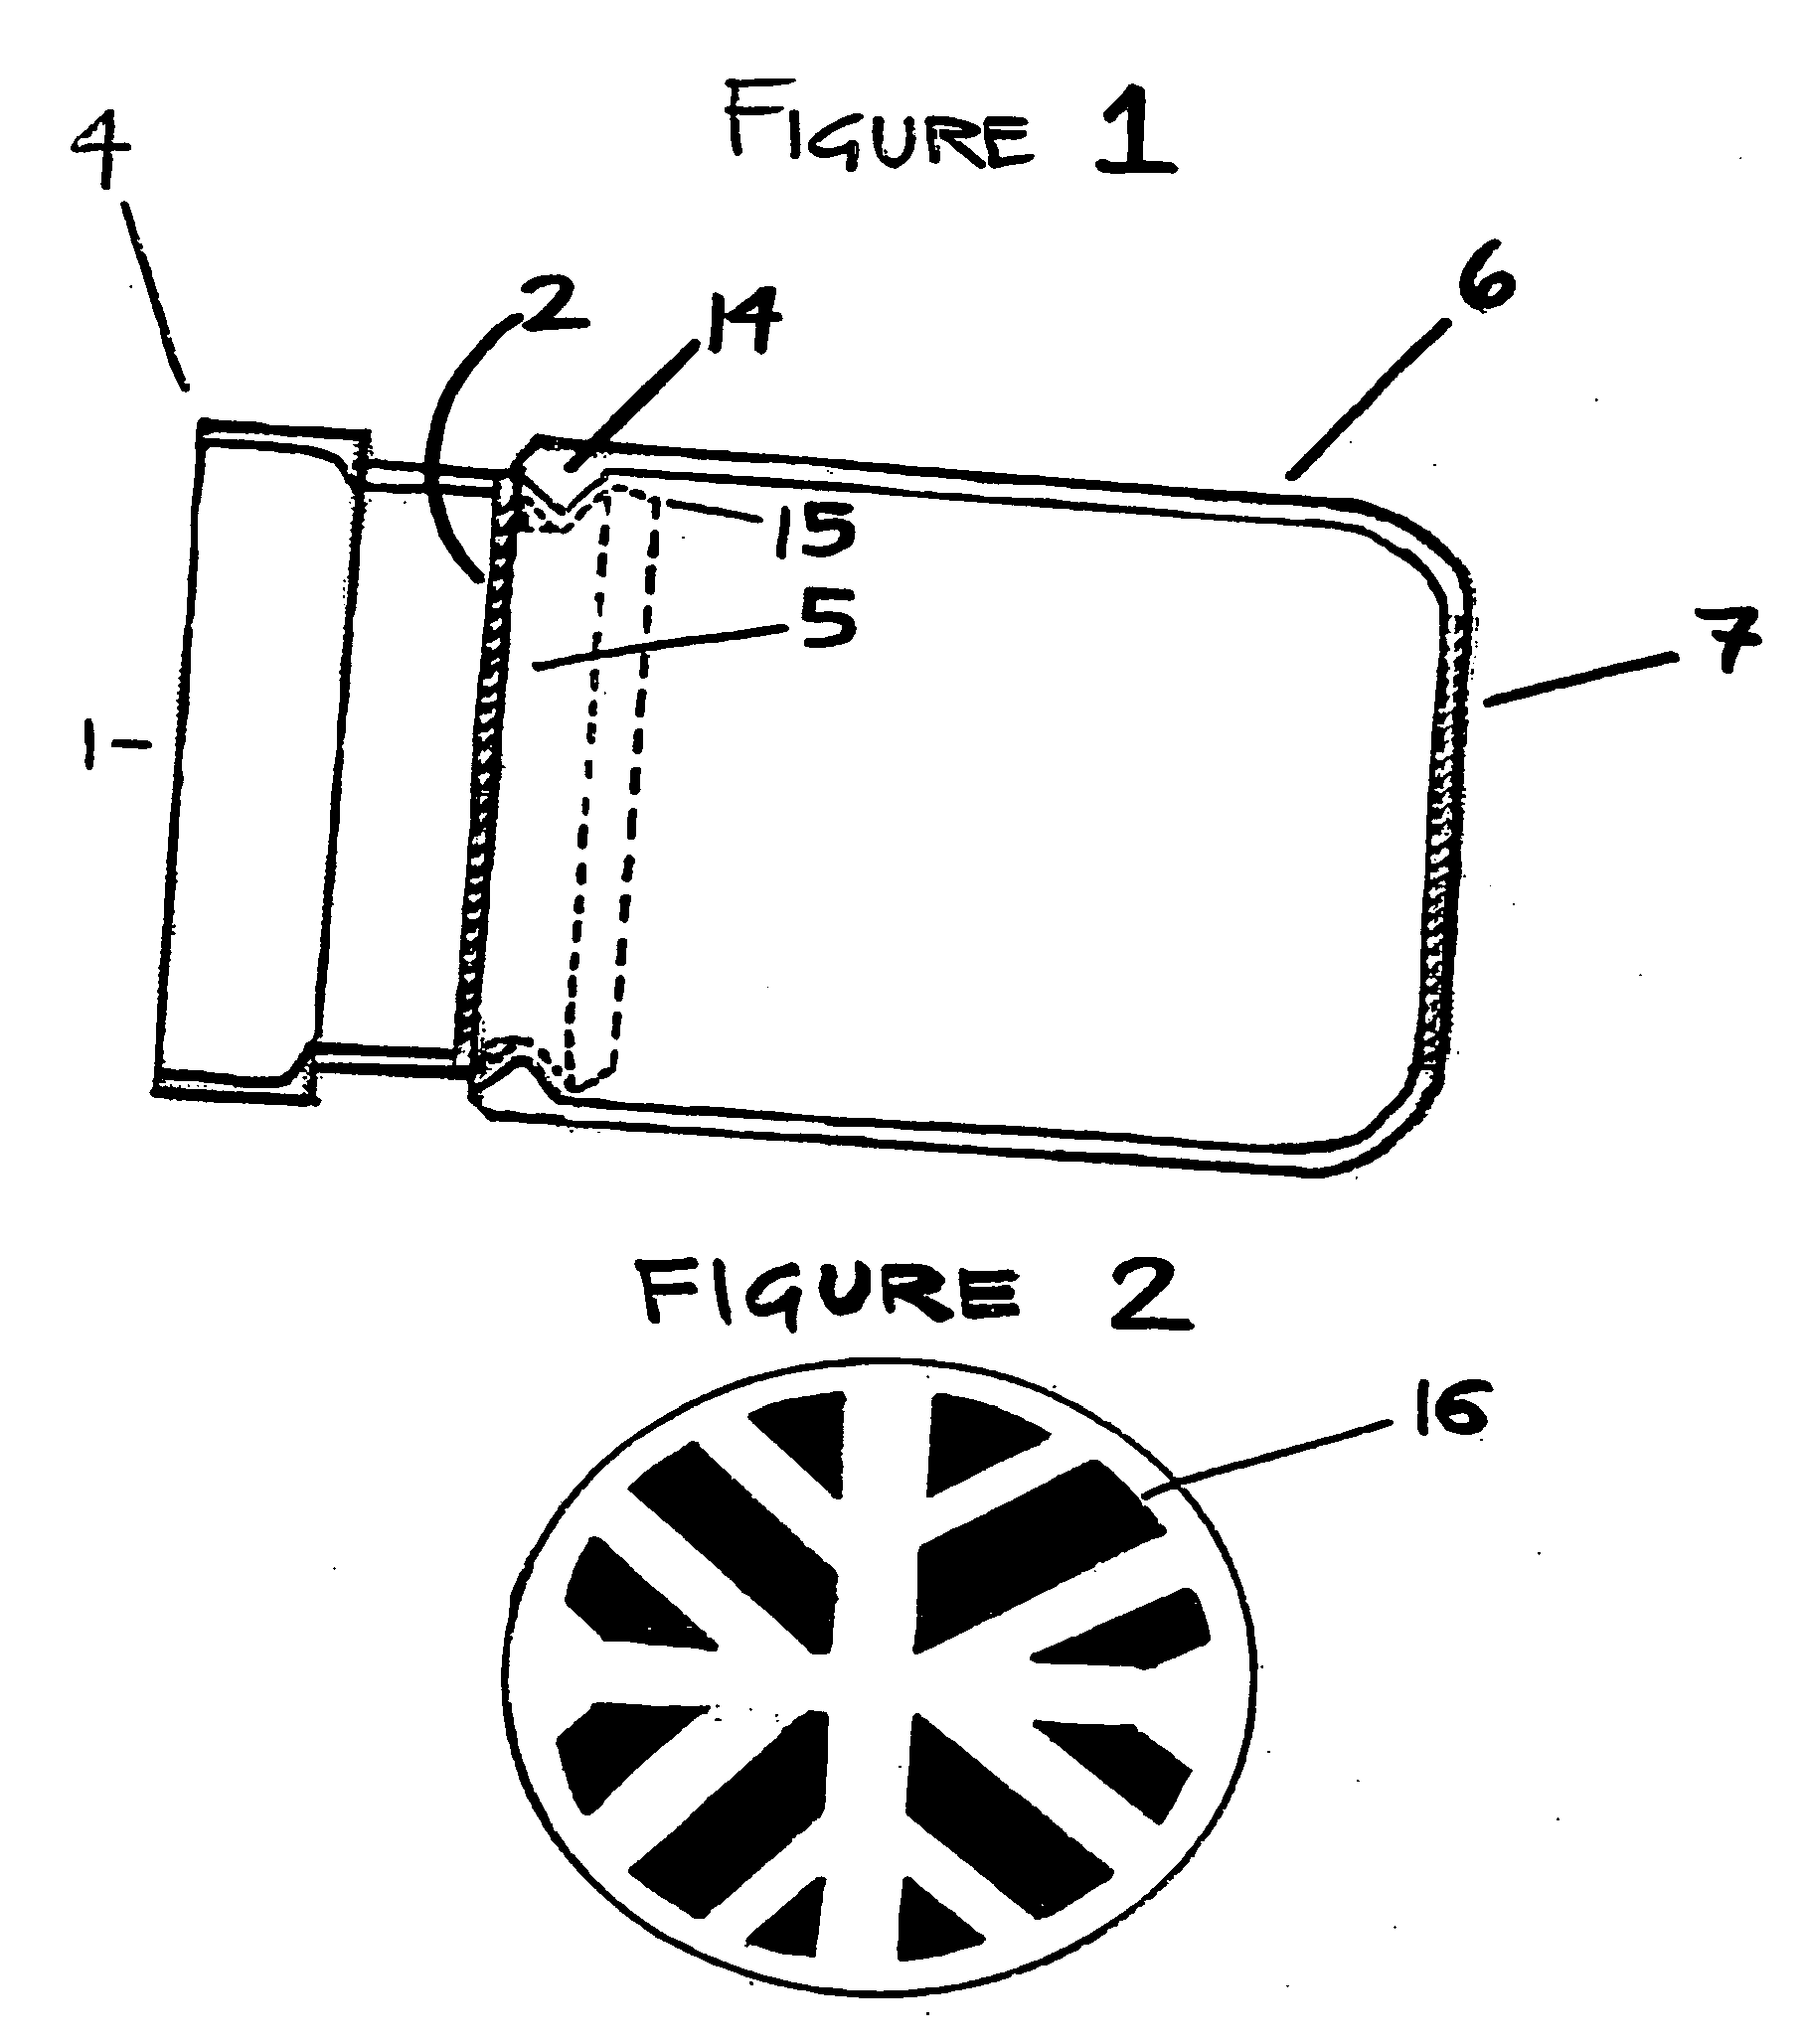 In-mouth filtration apparatus